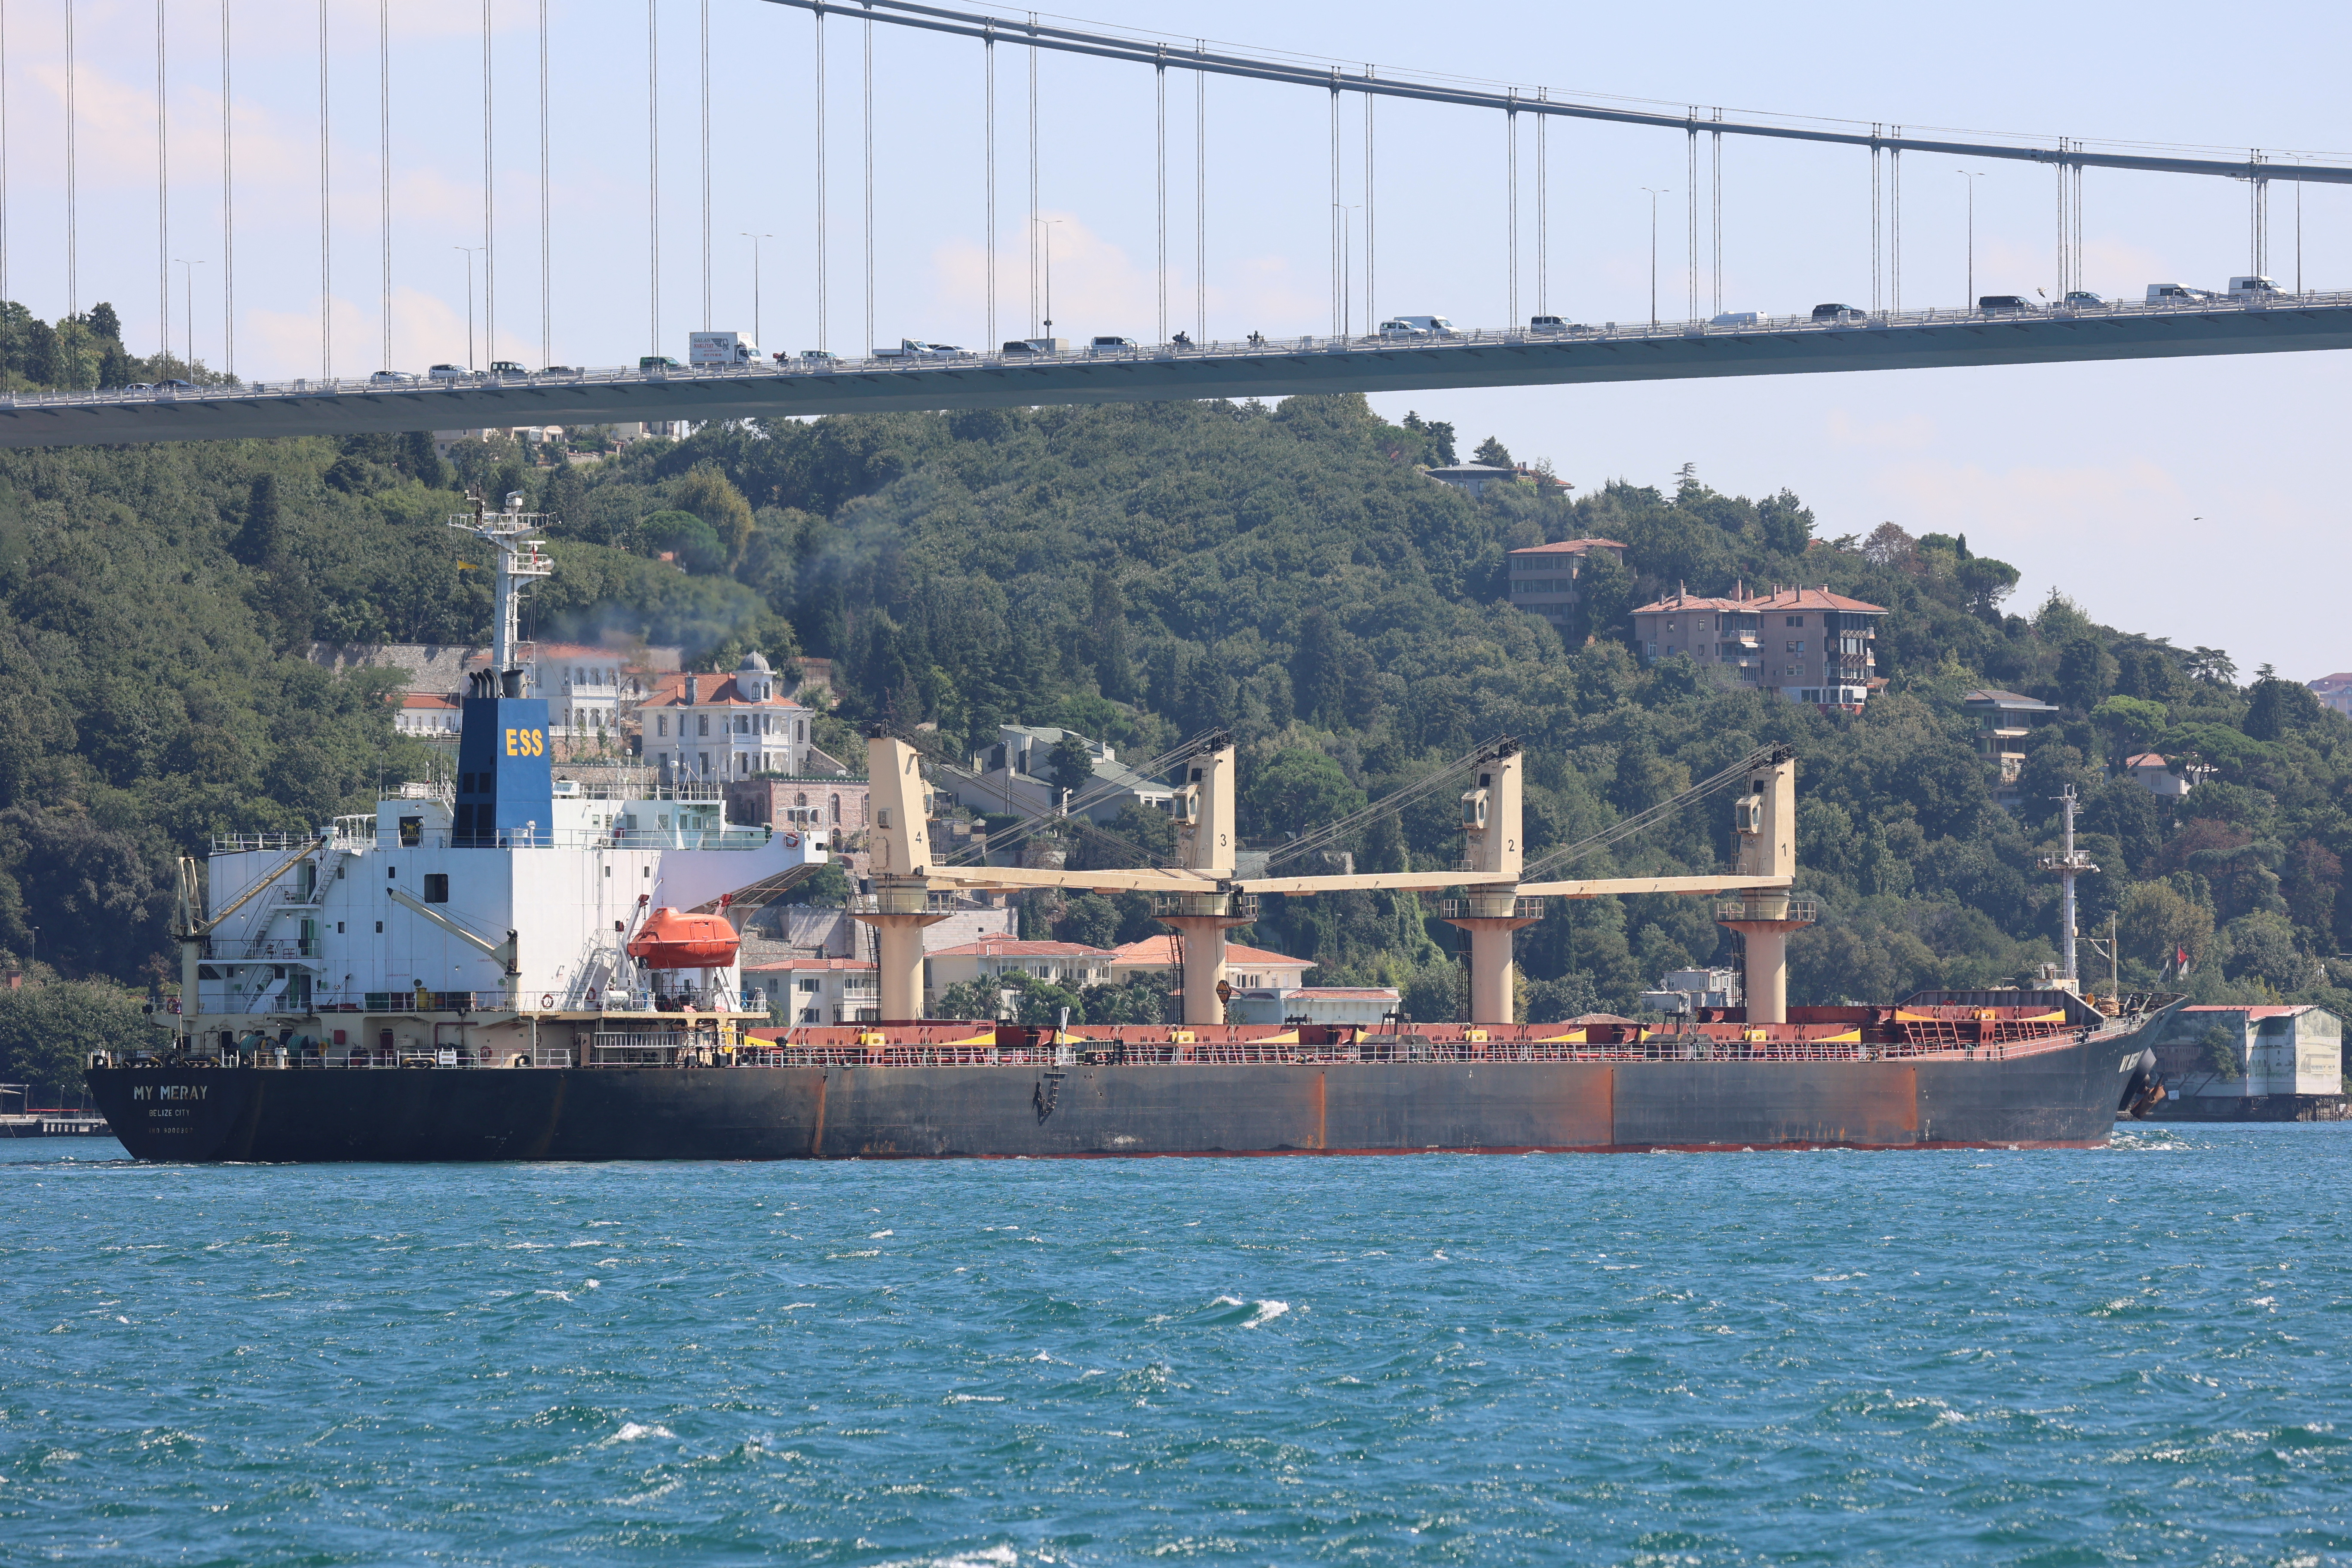 The Belize-flagged My Meray carrying Ukrainian grain sails in Istanbul's Bosphorus